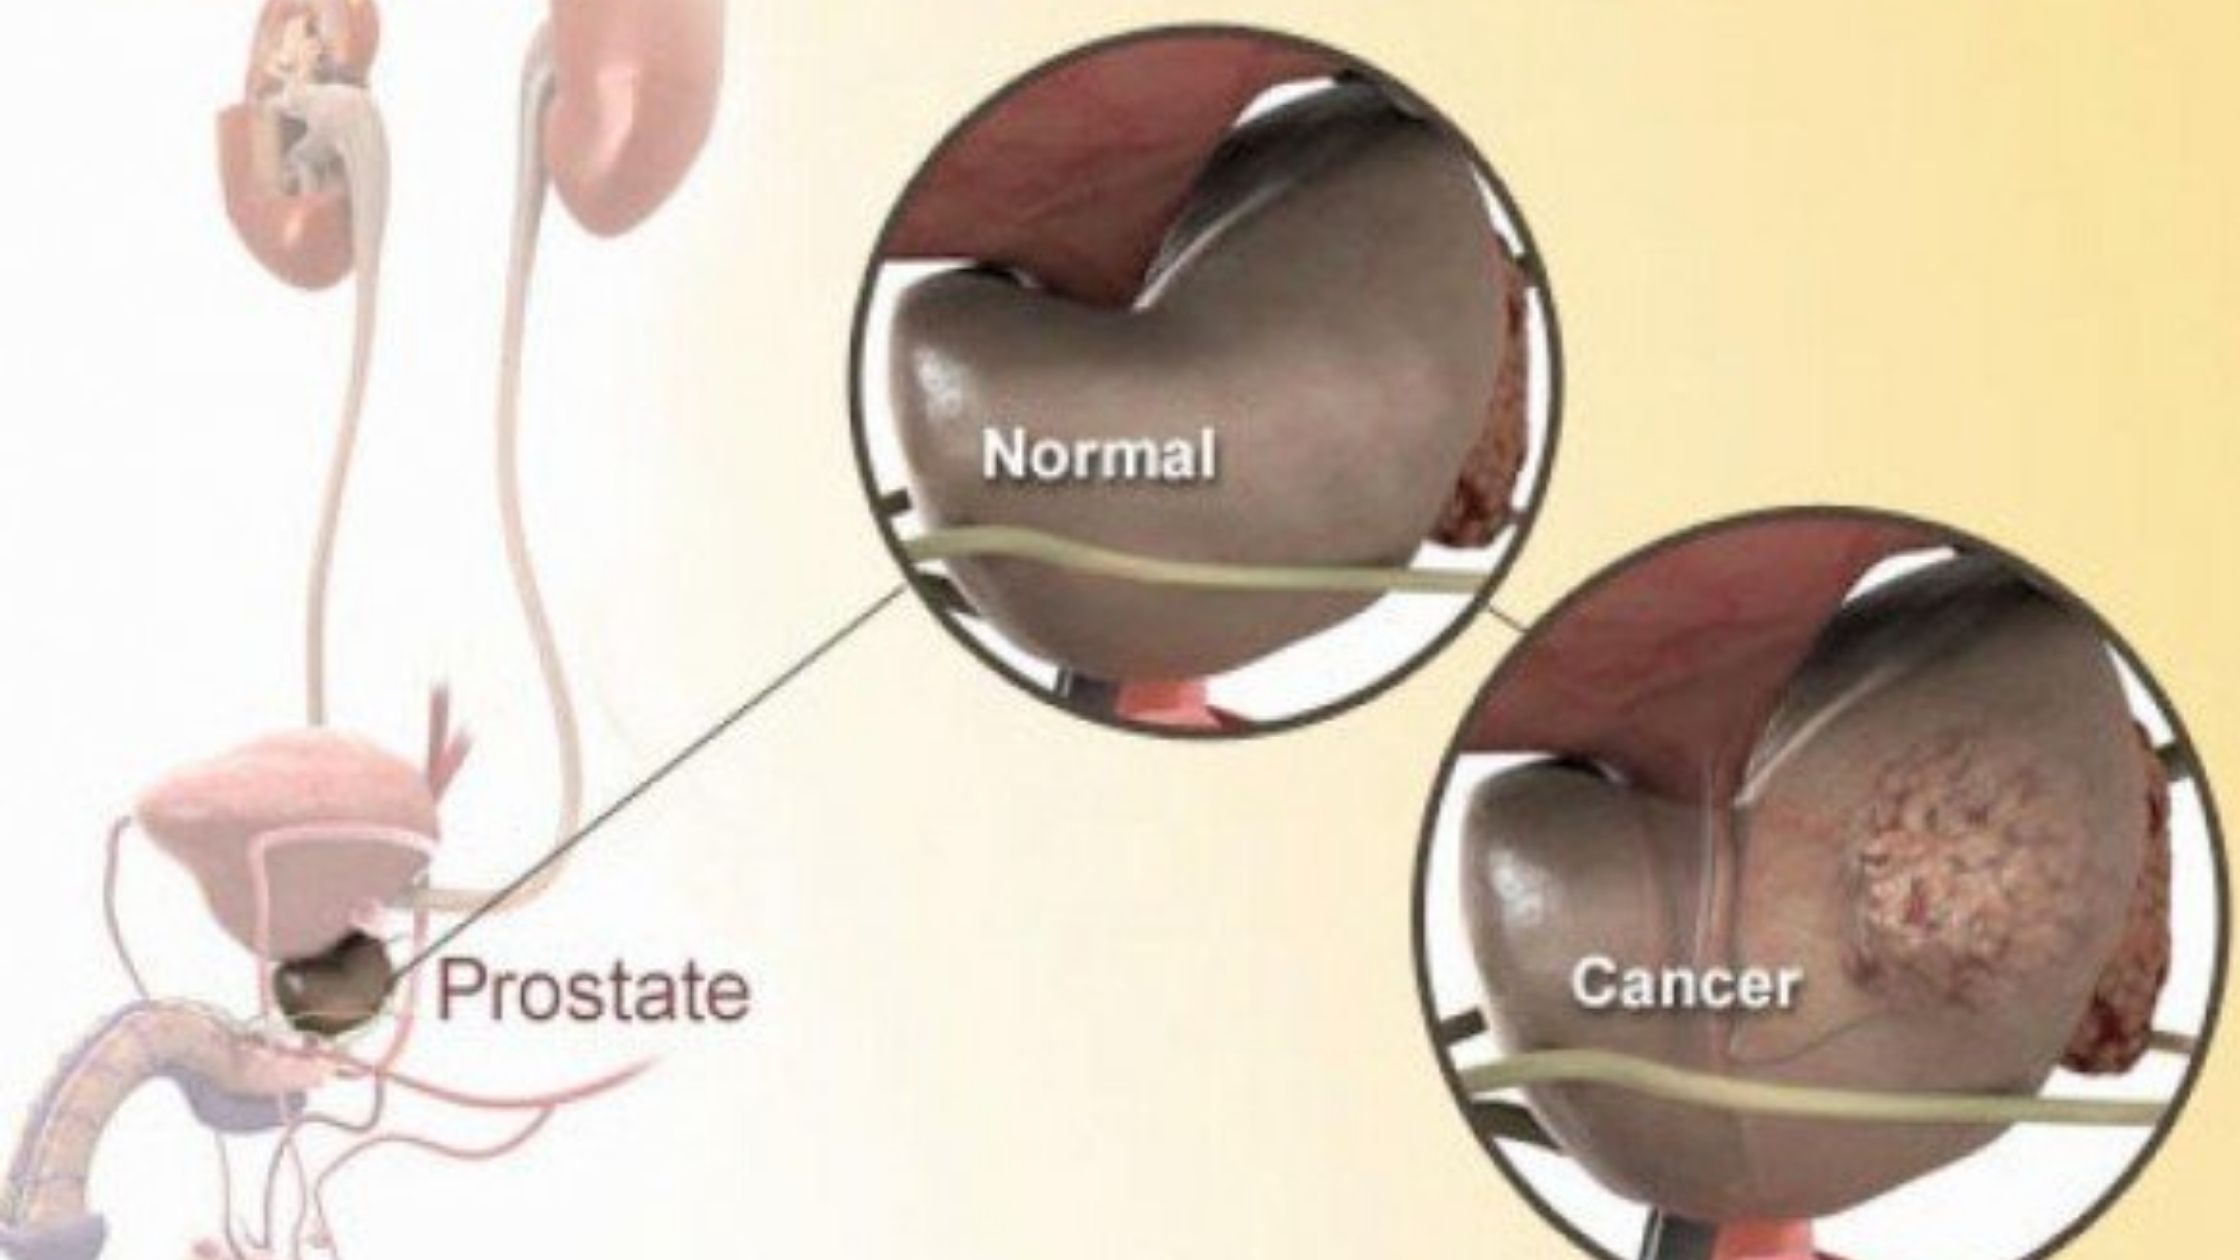 Treatments for prostate cancer or enlarged prostate